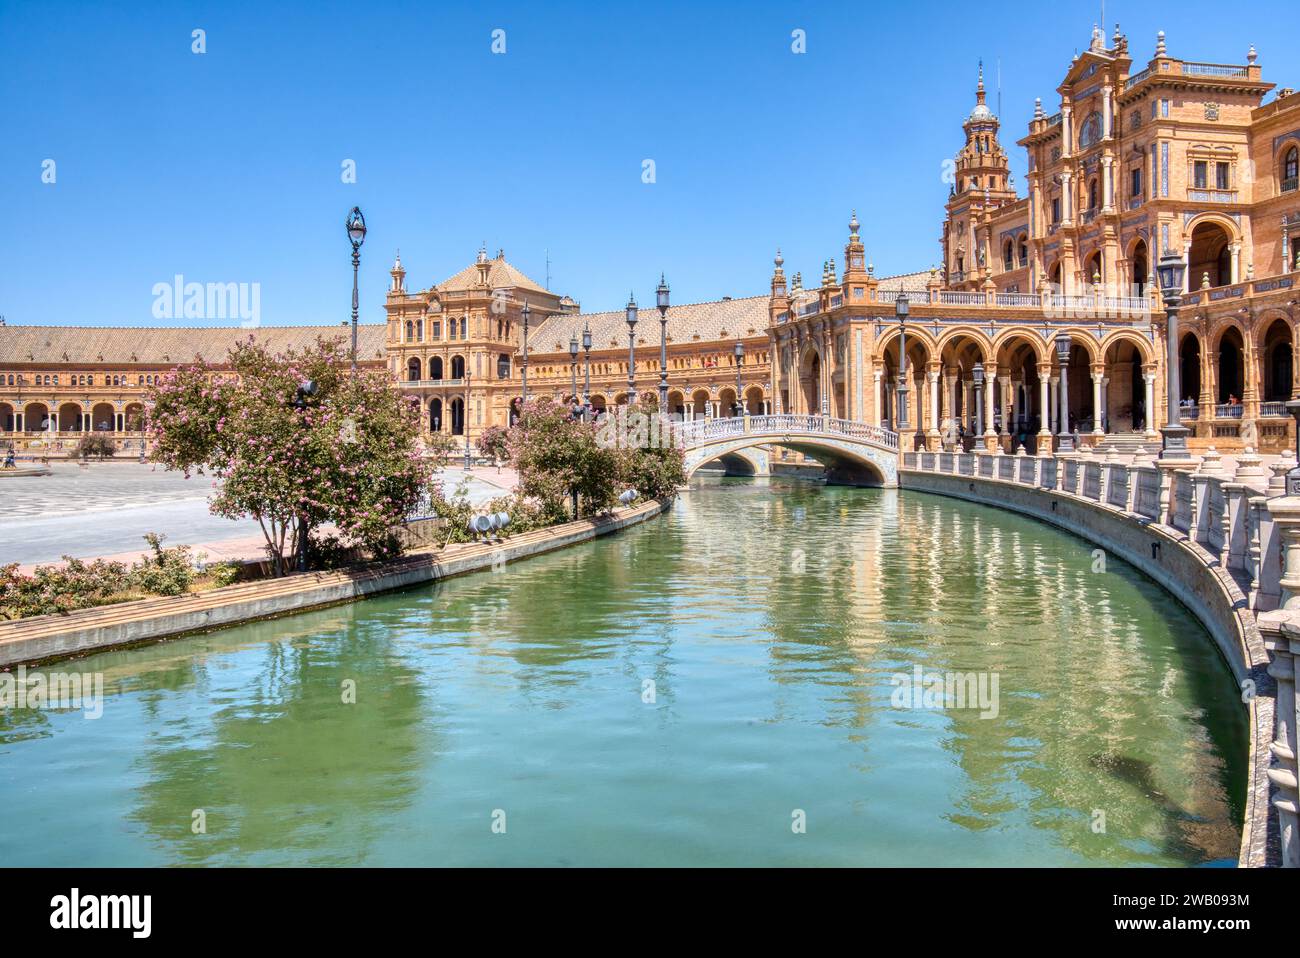 Beautiful Plaza de Espana in Seville, Spain. The plaza was completed in 1929 for the Ibero-American Exposition and is now a popular tourist destinatio Stock Photo